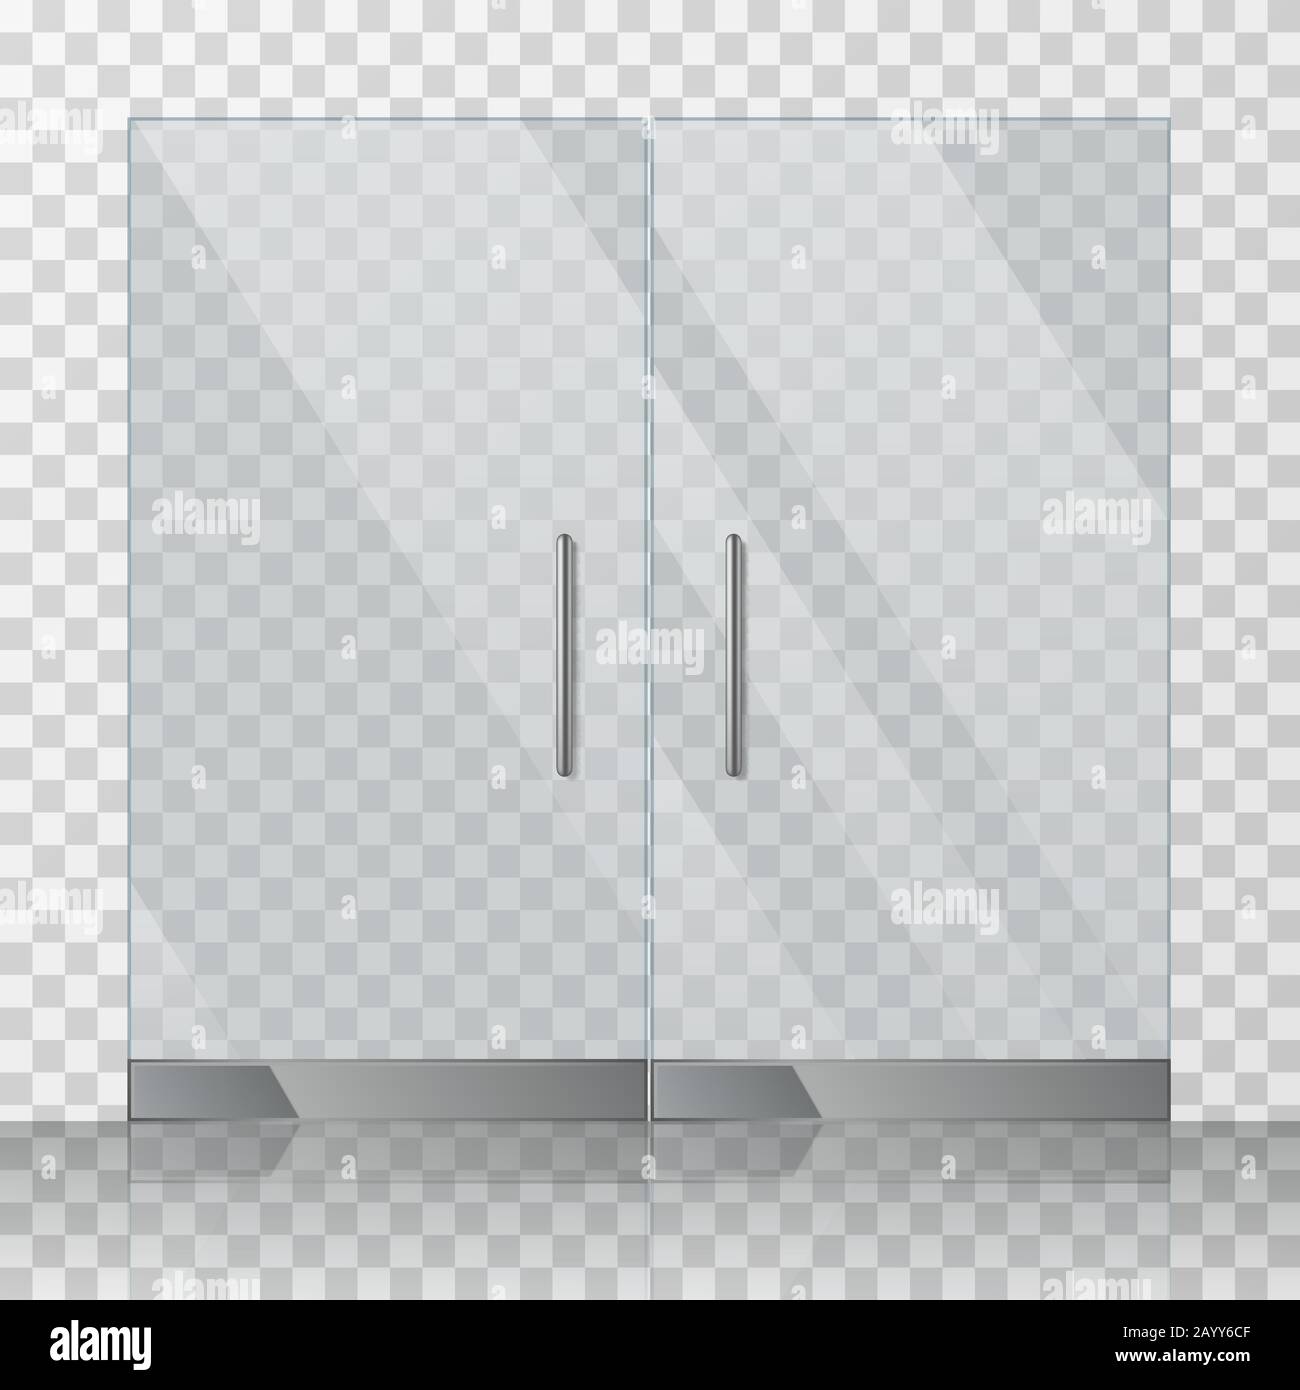 Mall, store glass doors for market and fashion boutique, vector illustration Stock Vector